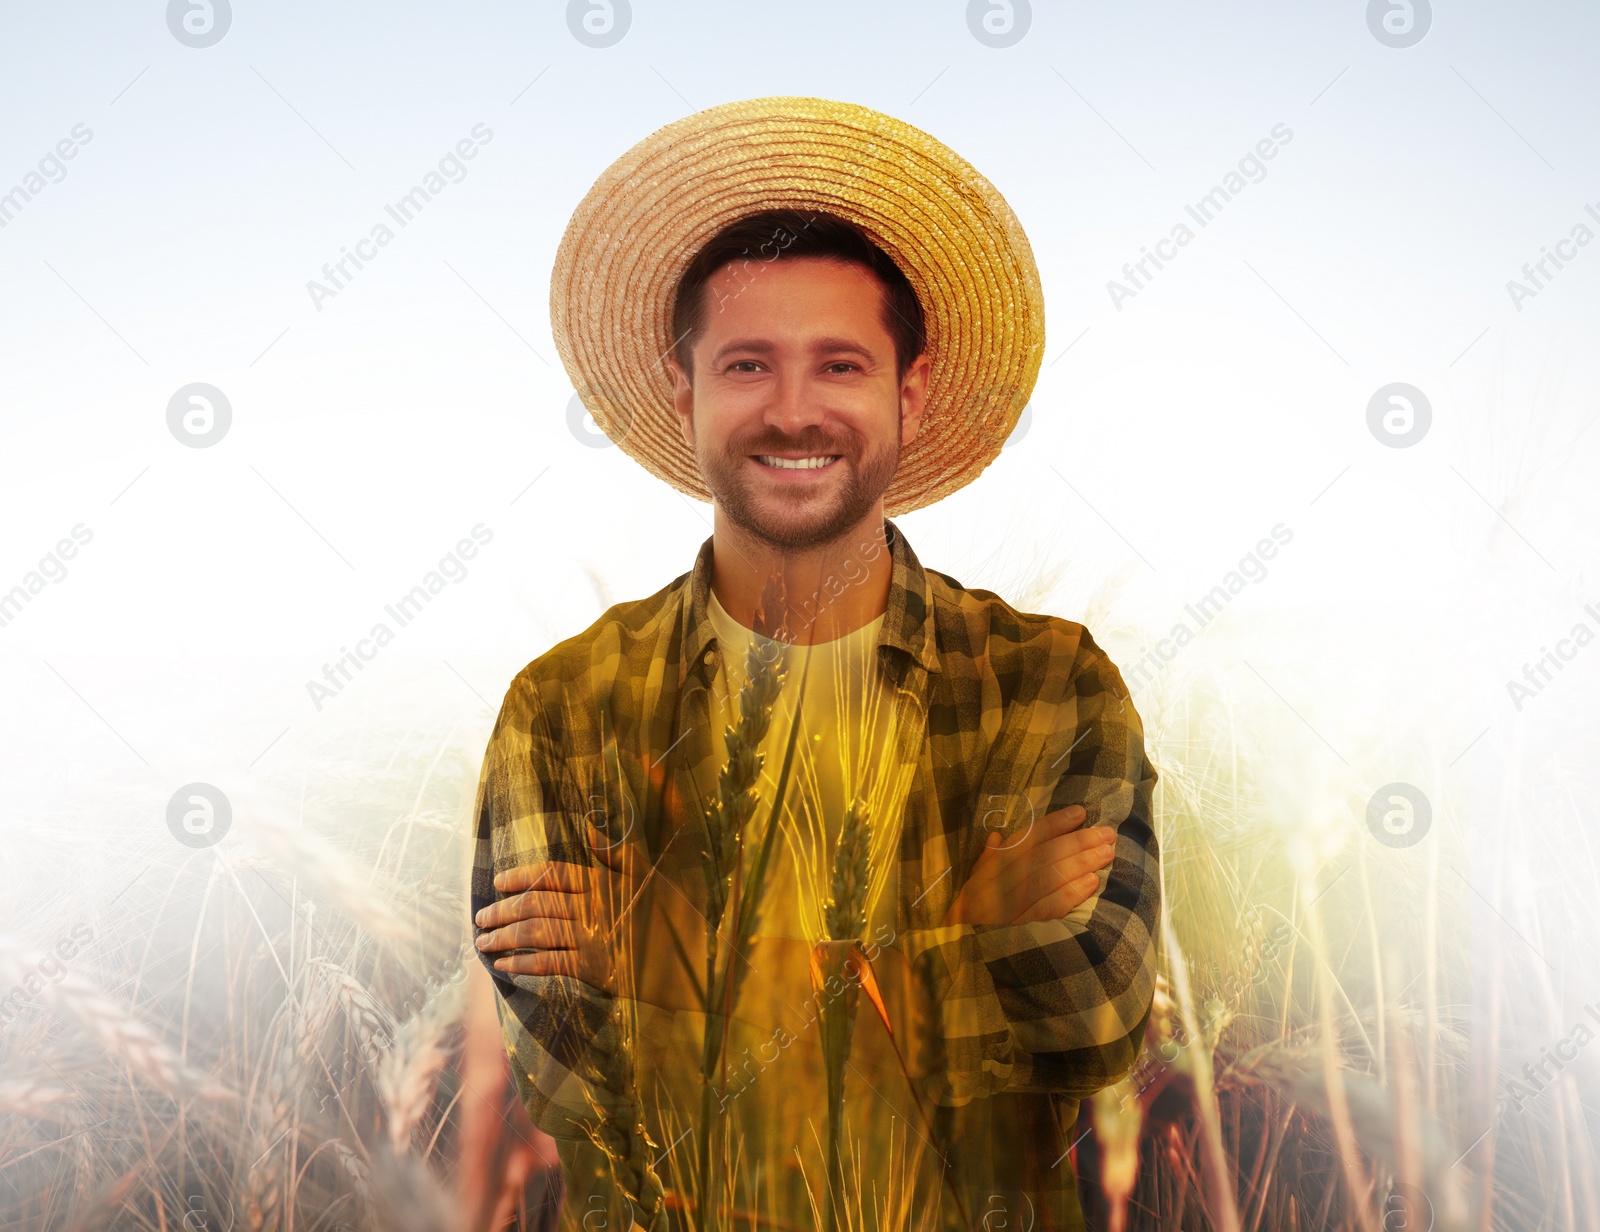 Image of Double exposure of farmer and wheat field on white background